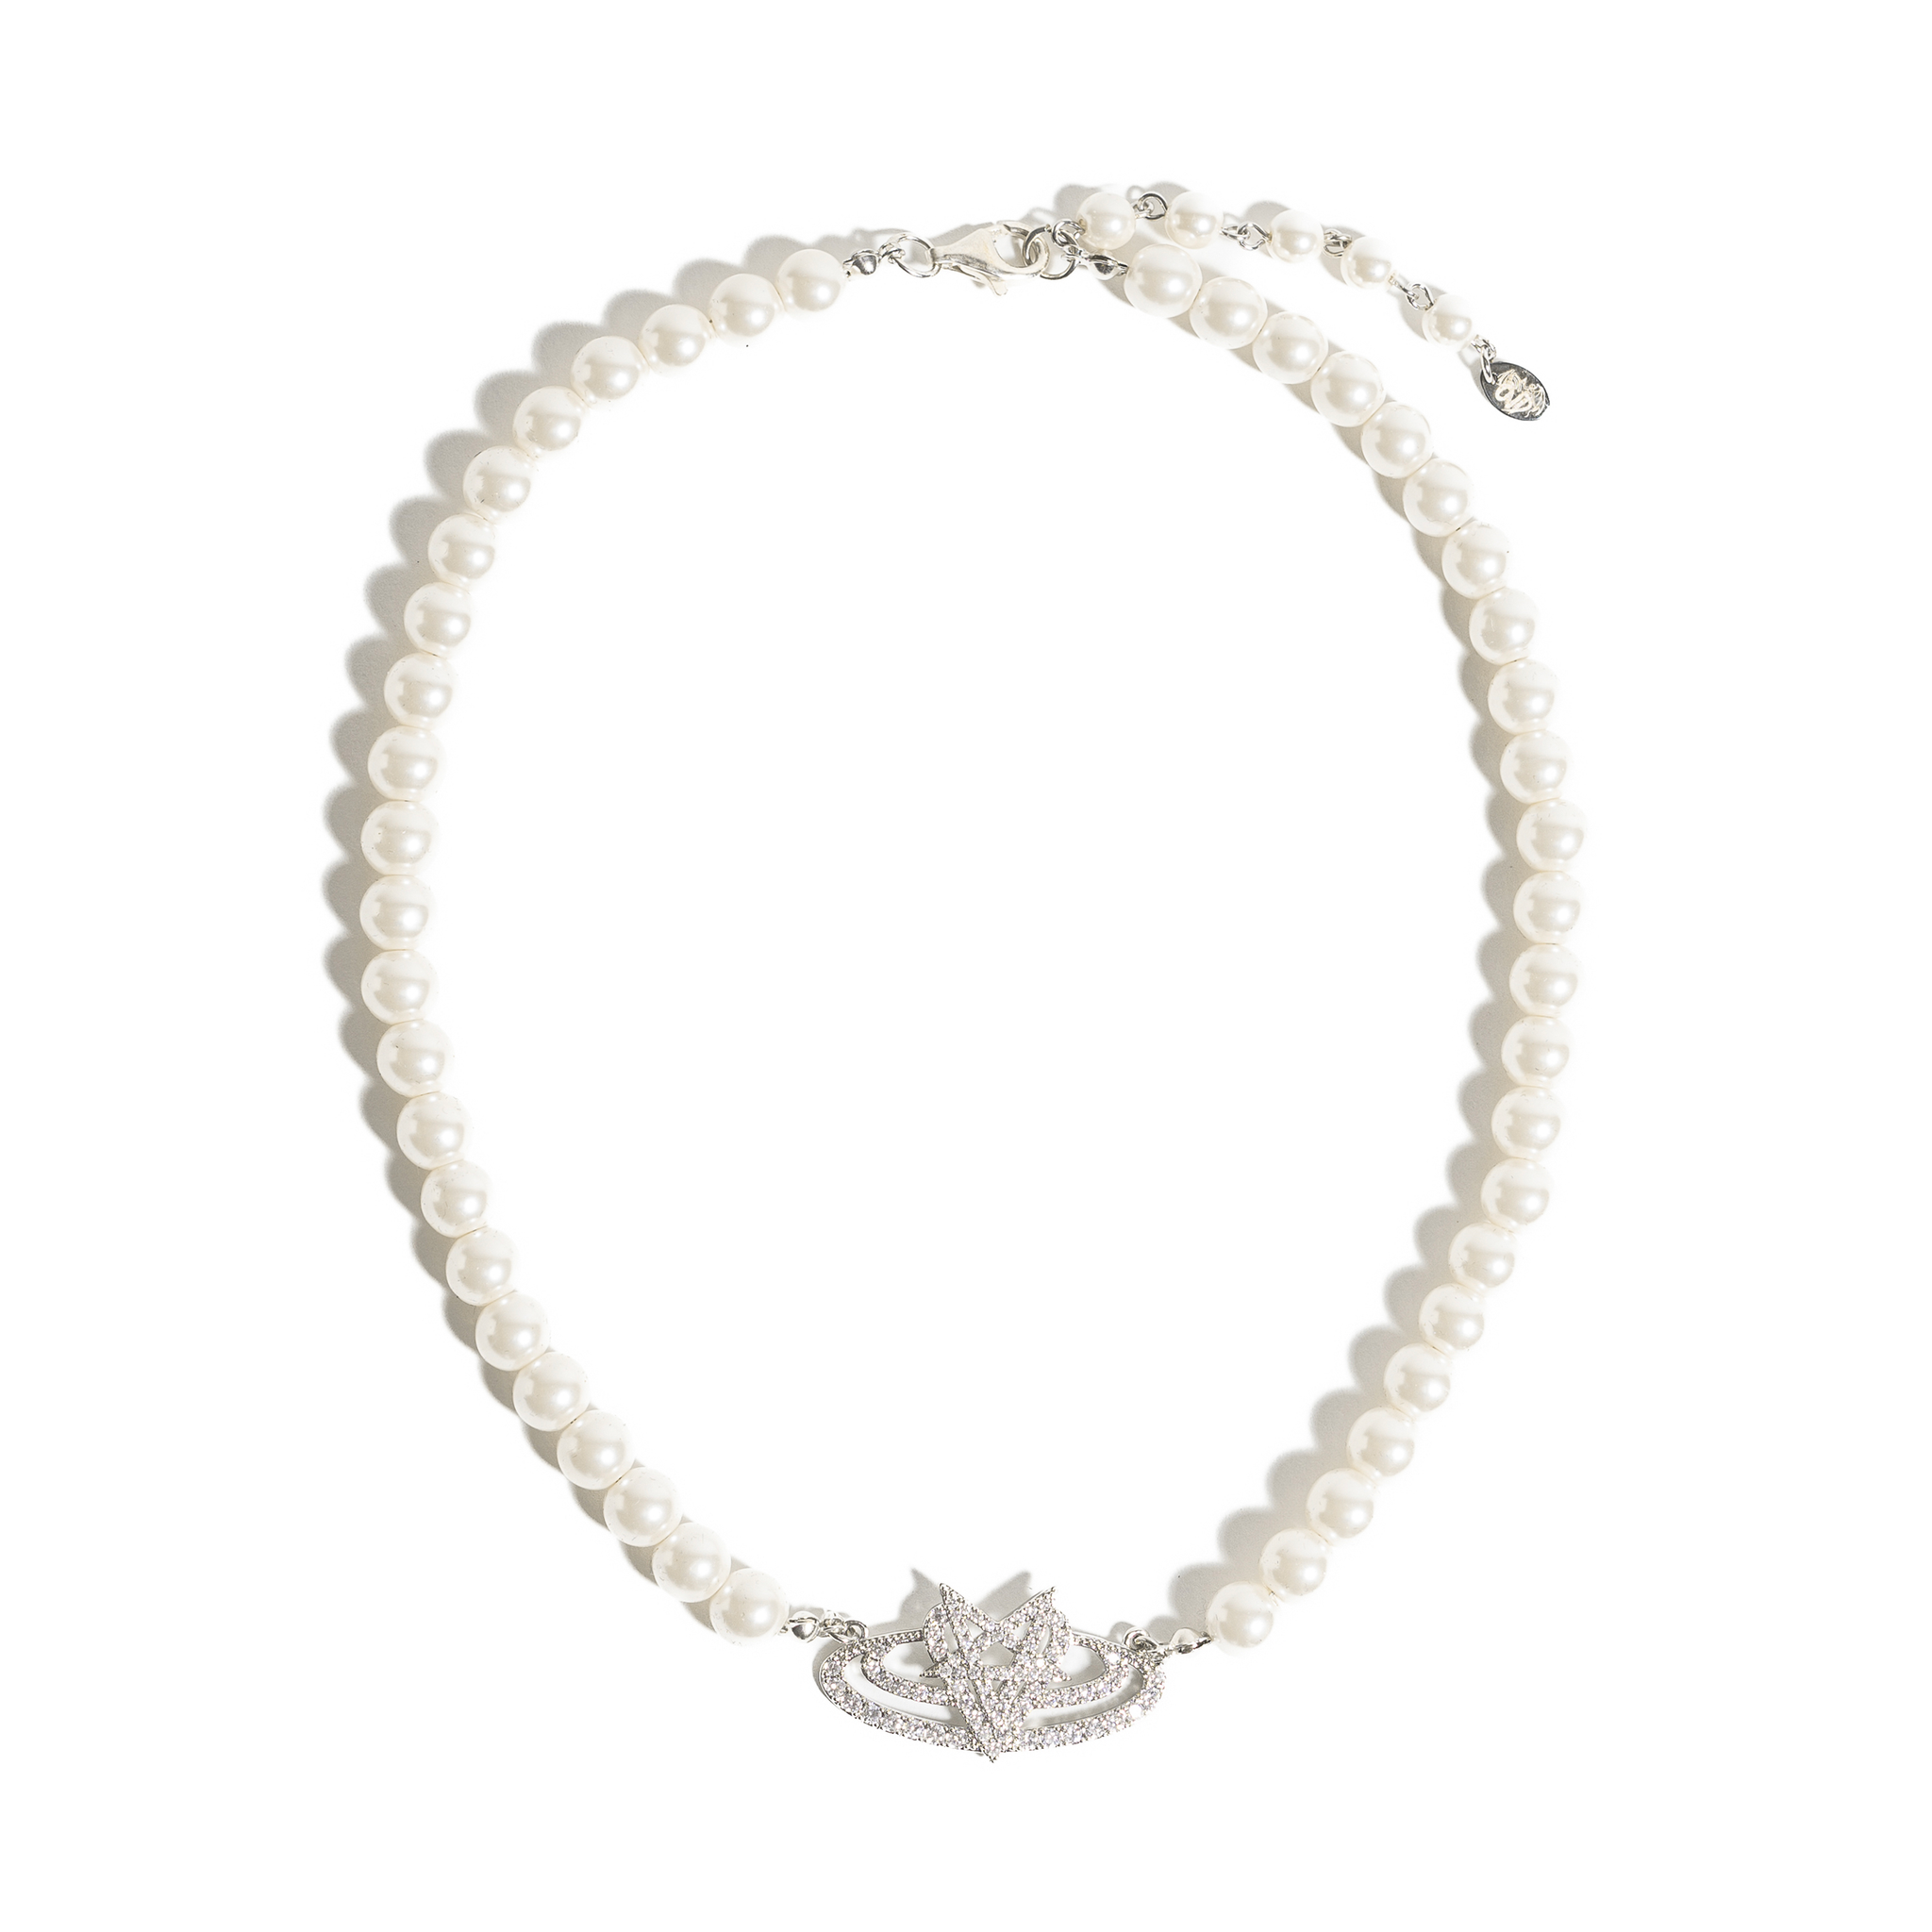 "S999TURN" PEARL NECKLACE